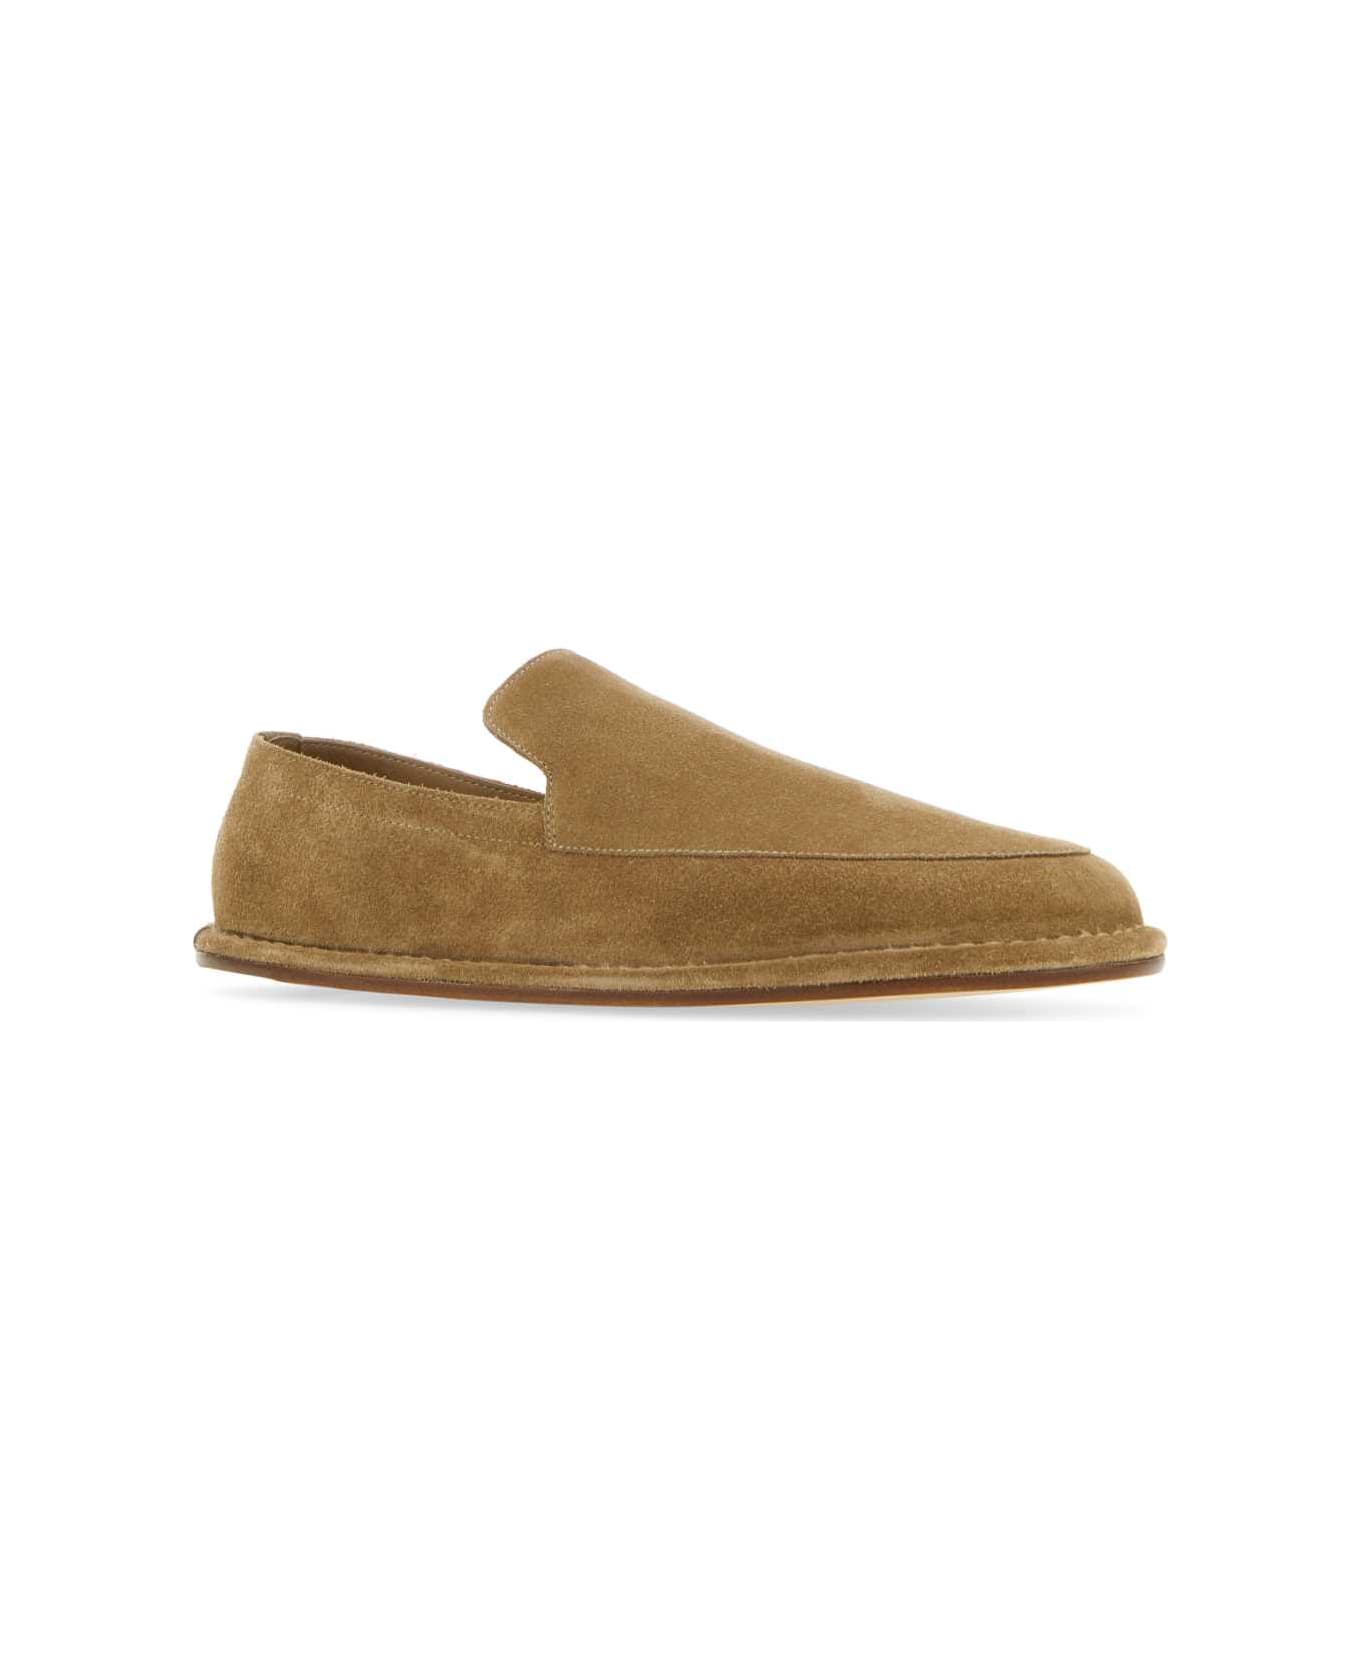 Maison Margiela Biscuit Suede Loafers - T2172